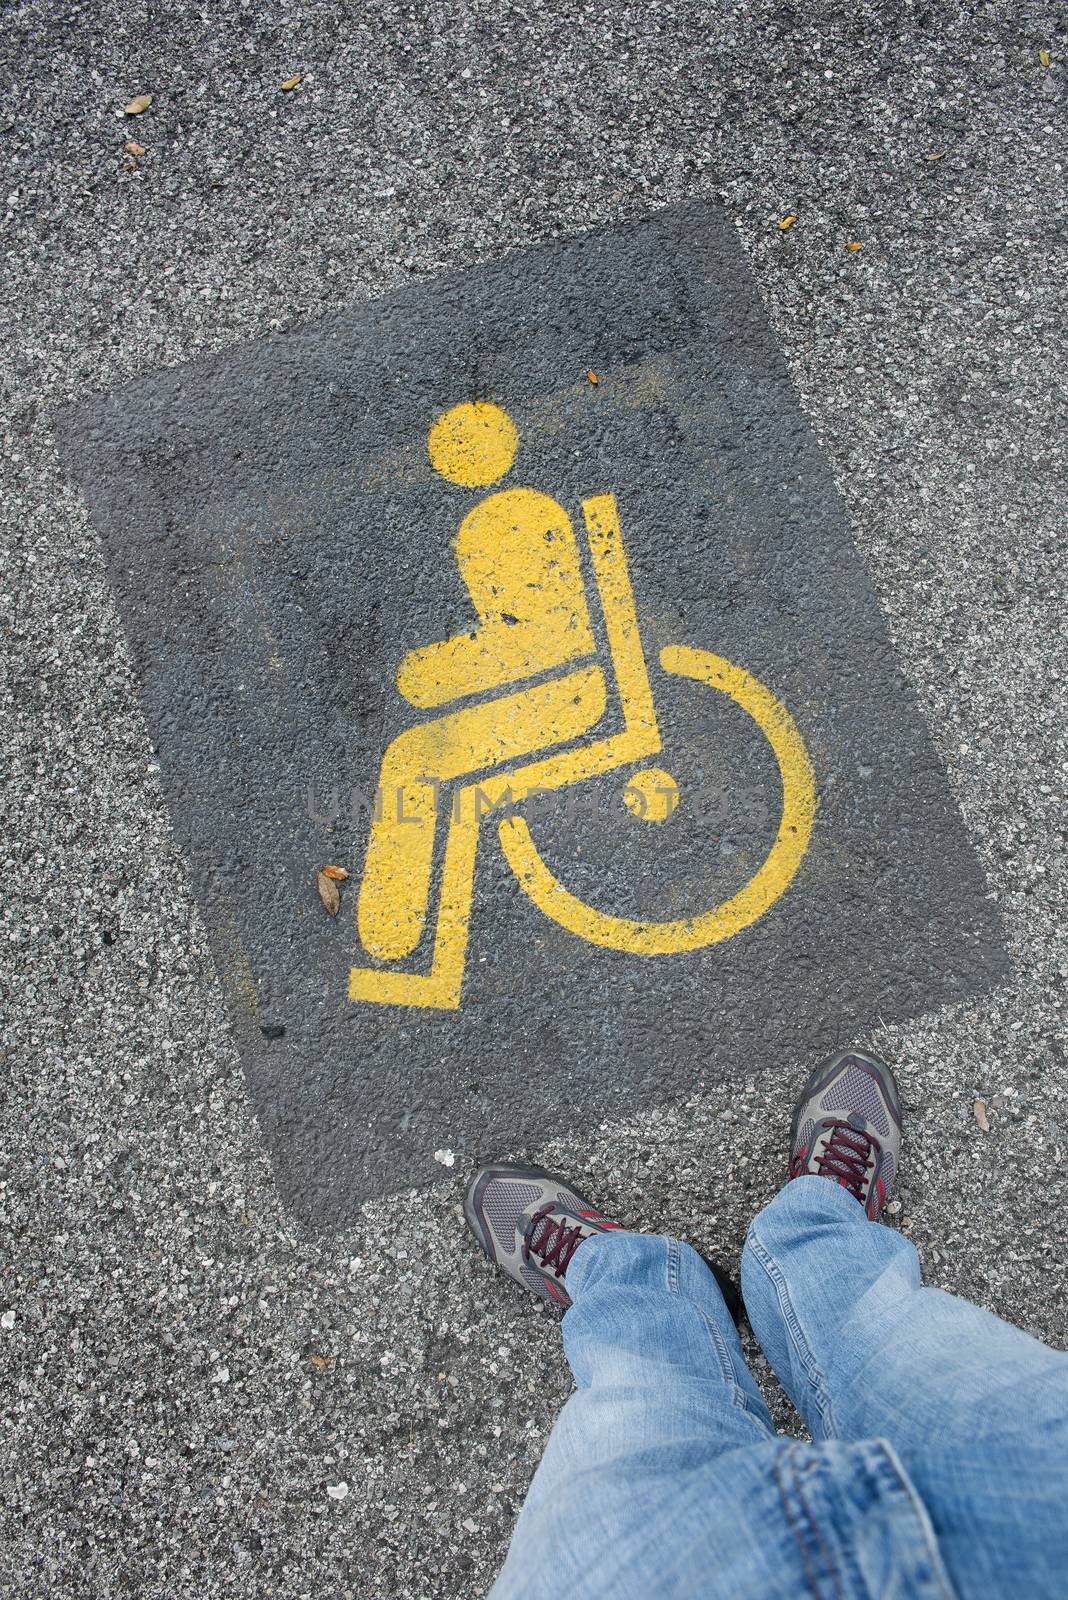 indication of a parking space for disabled people